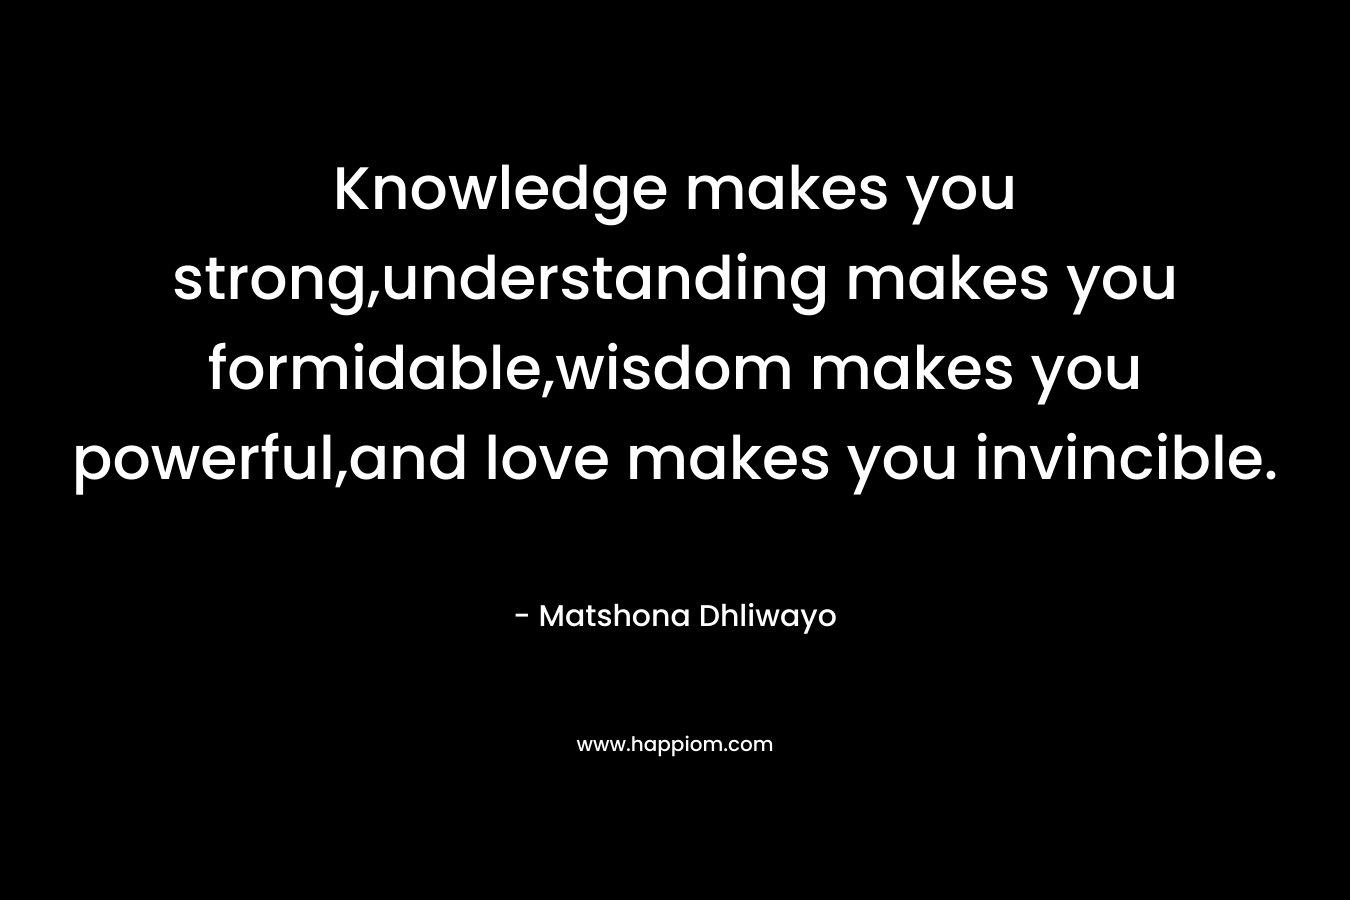 Knowledge makes you strong,understanding makes you formidable,wisdom makes you powerful,and love makes you invincible.